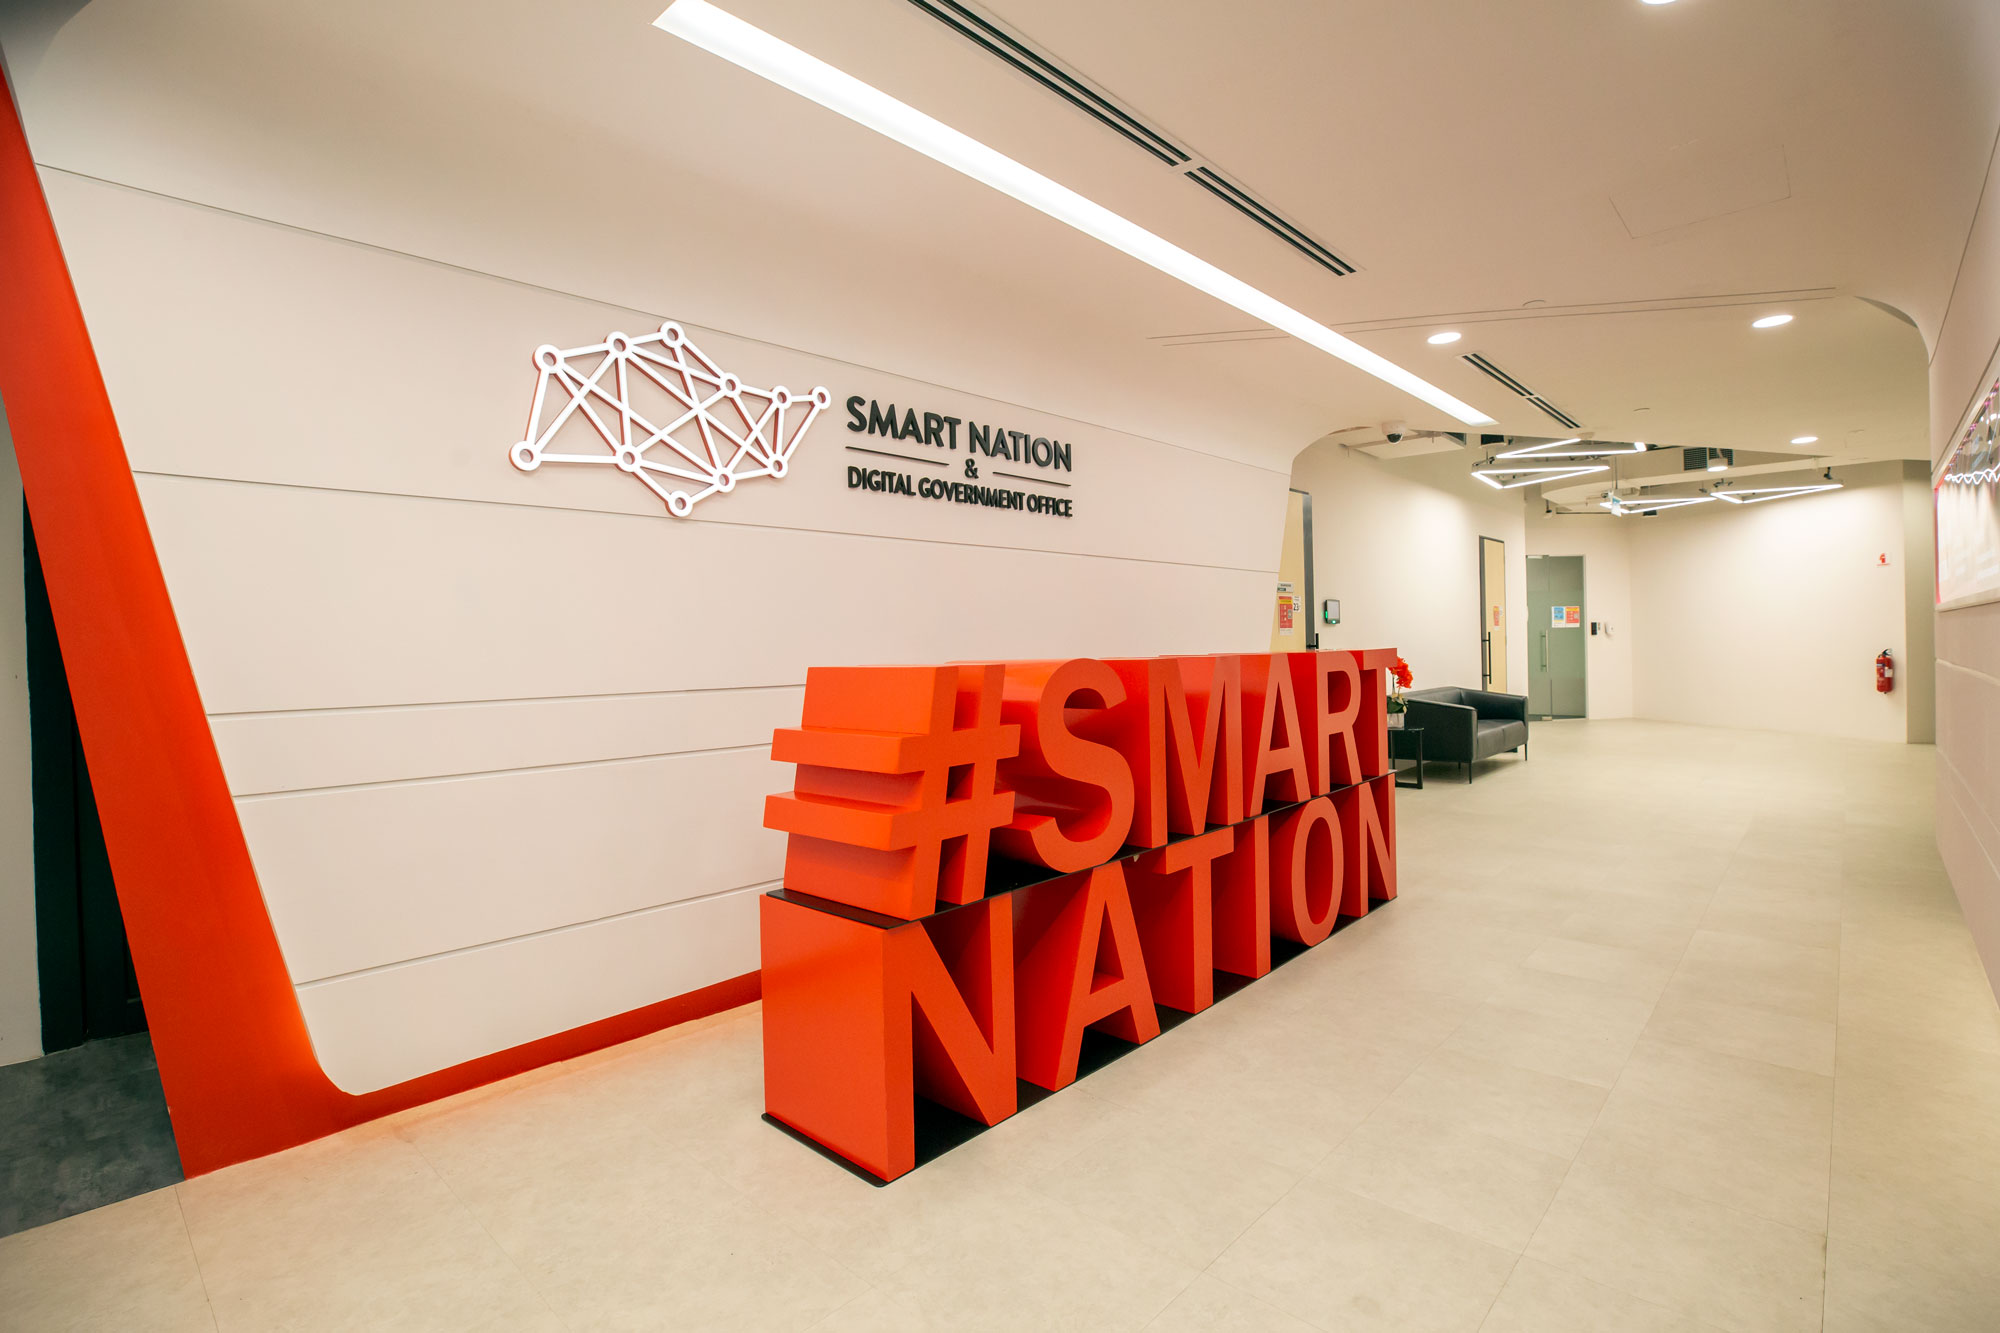 Smart Nation and Digital Government Office (SNDGO)